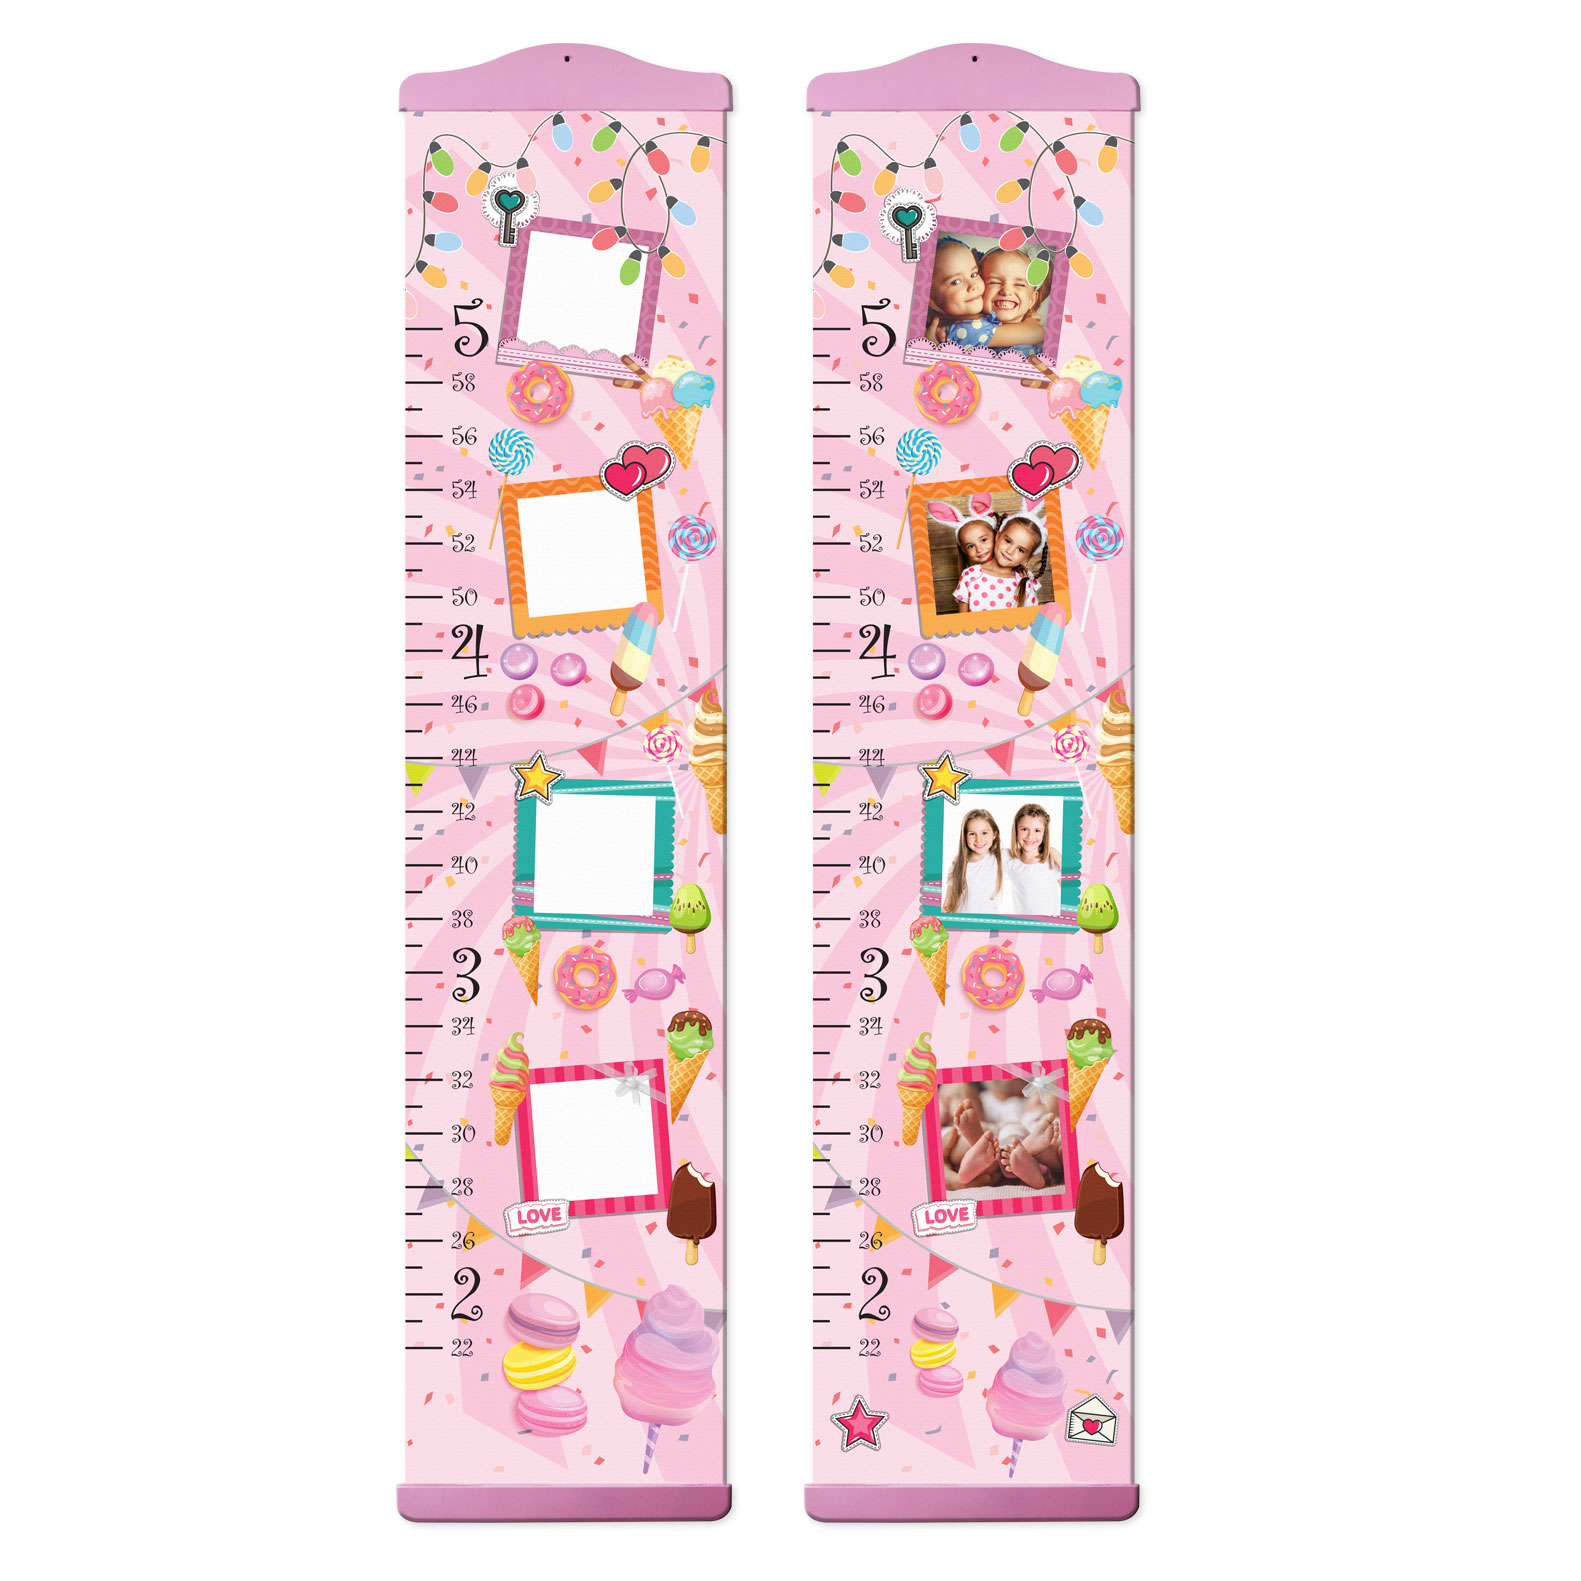 Sweets Growth Chart with Personalized Photos